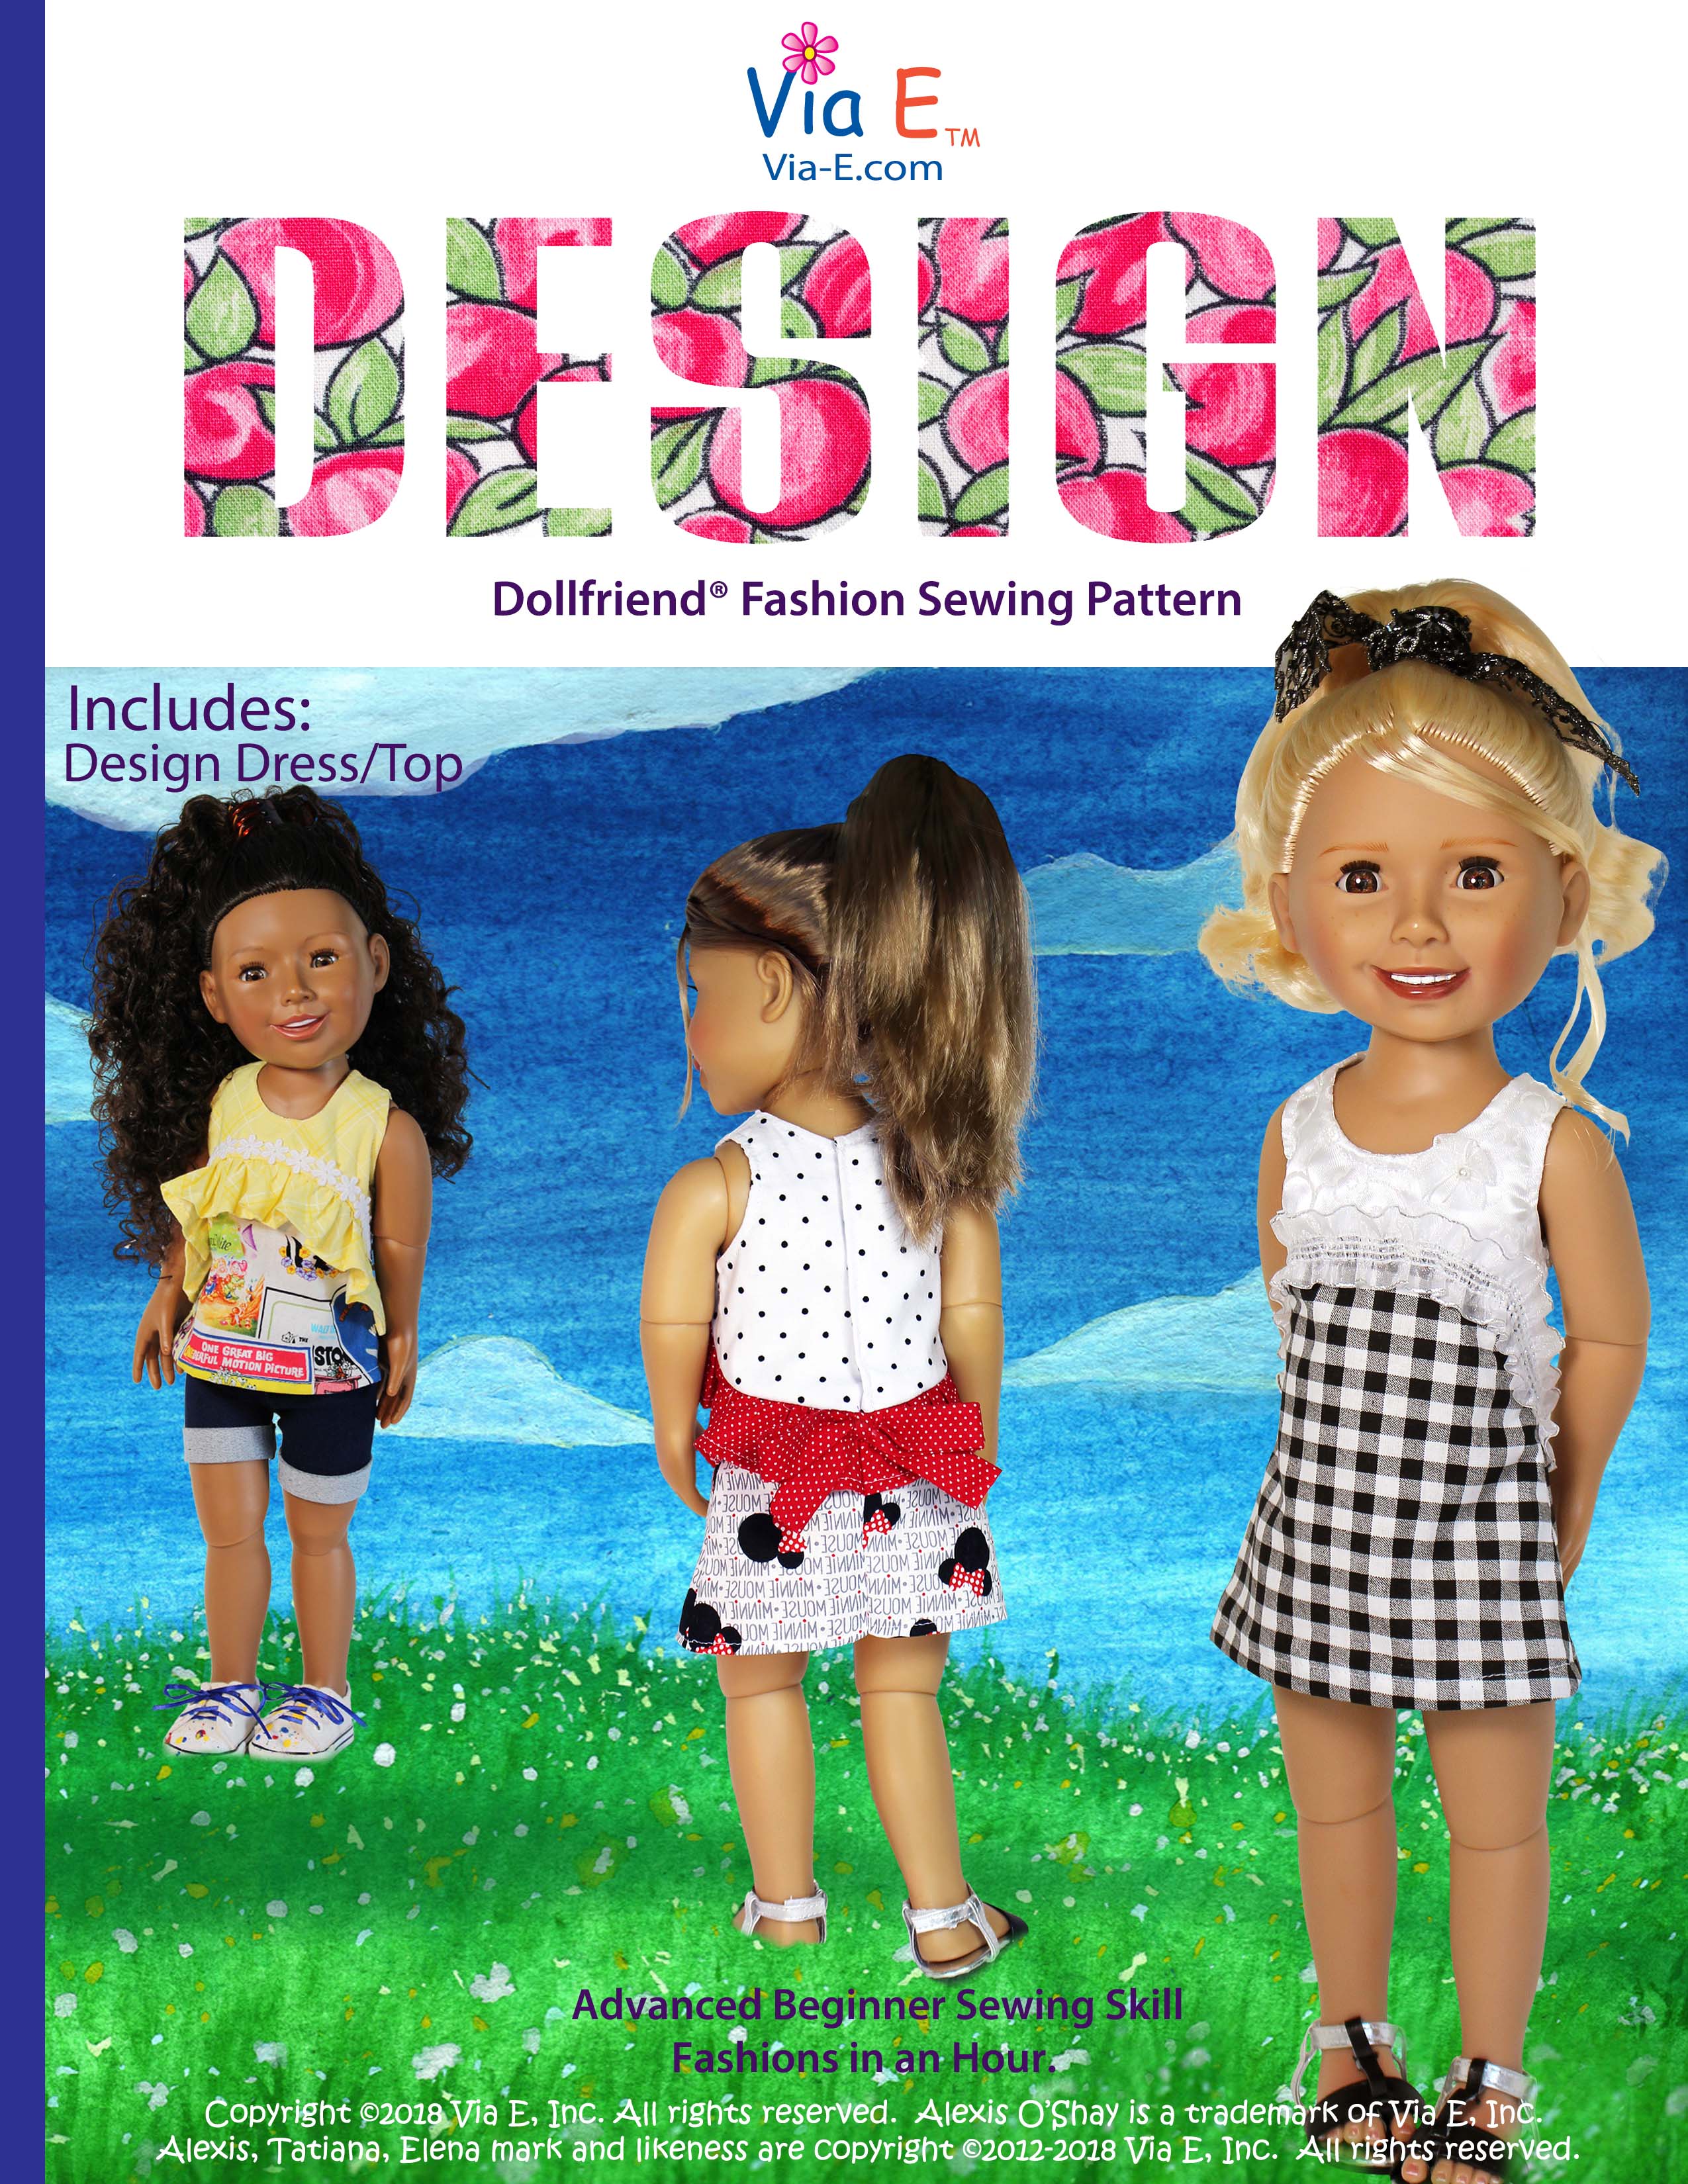 Design Dress and Top Pattern